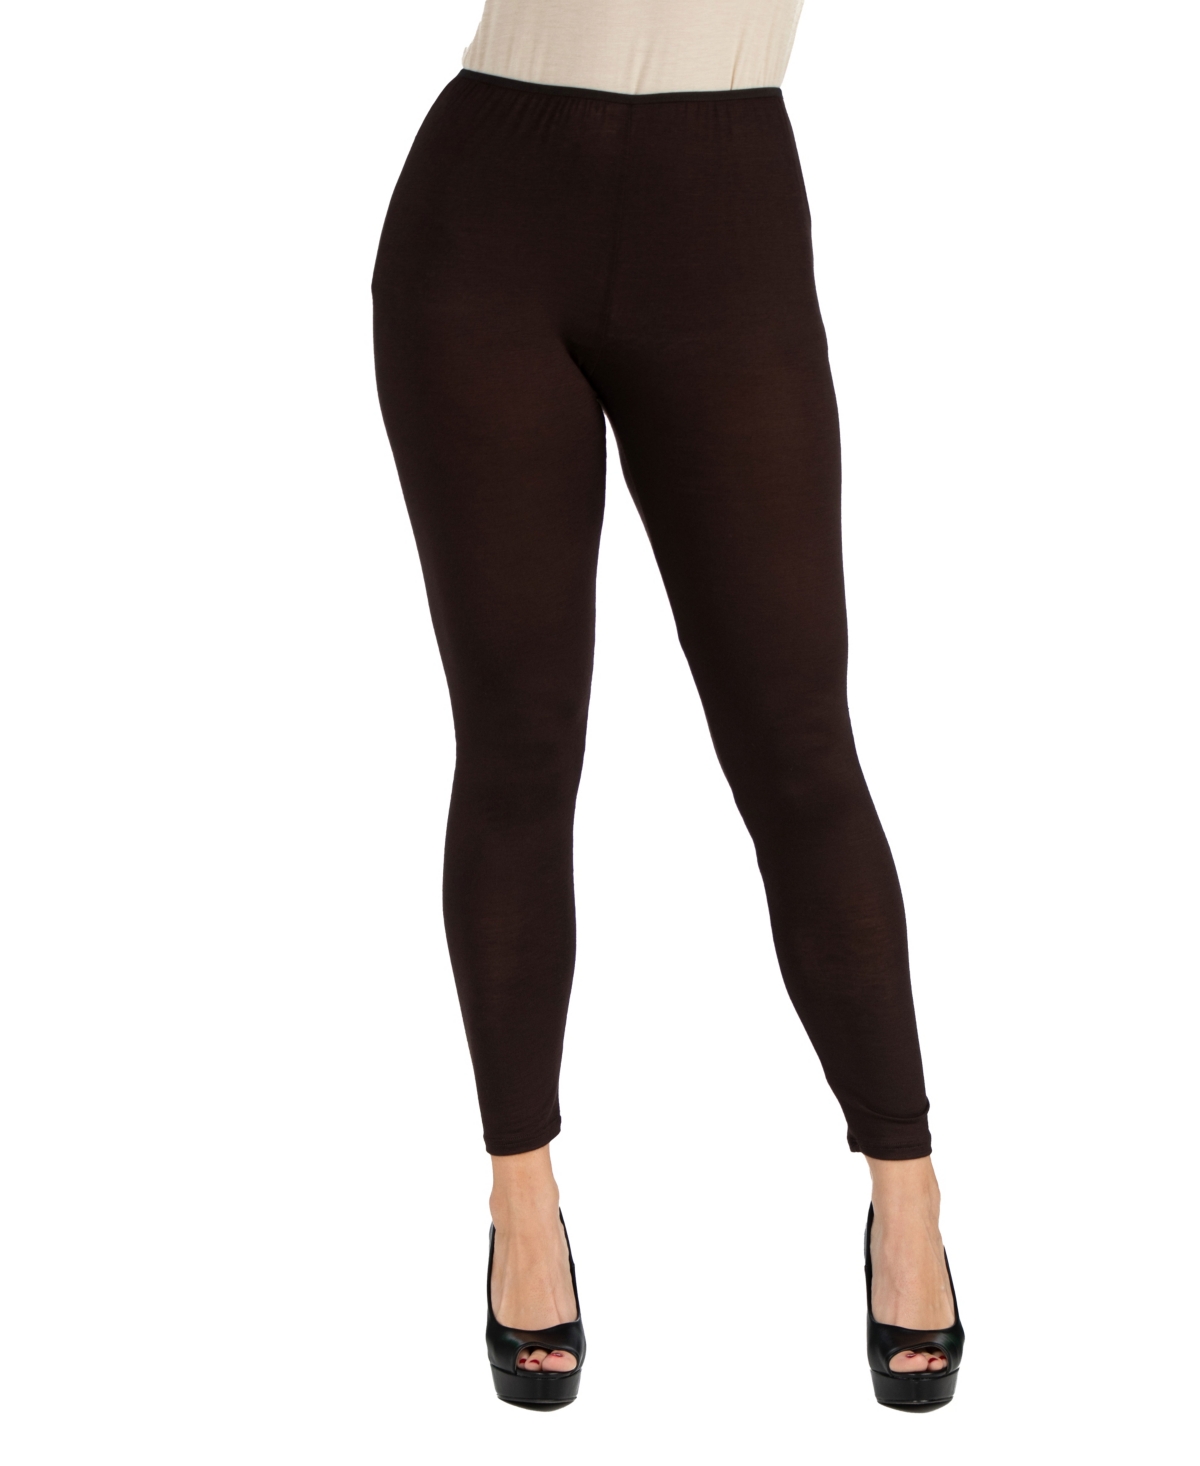 24seven Comfort Apparel Women's Stretch Ankle Length Leggings In Brown